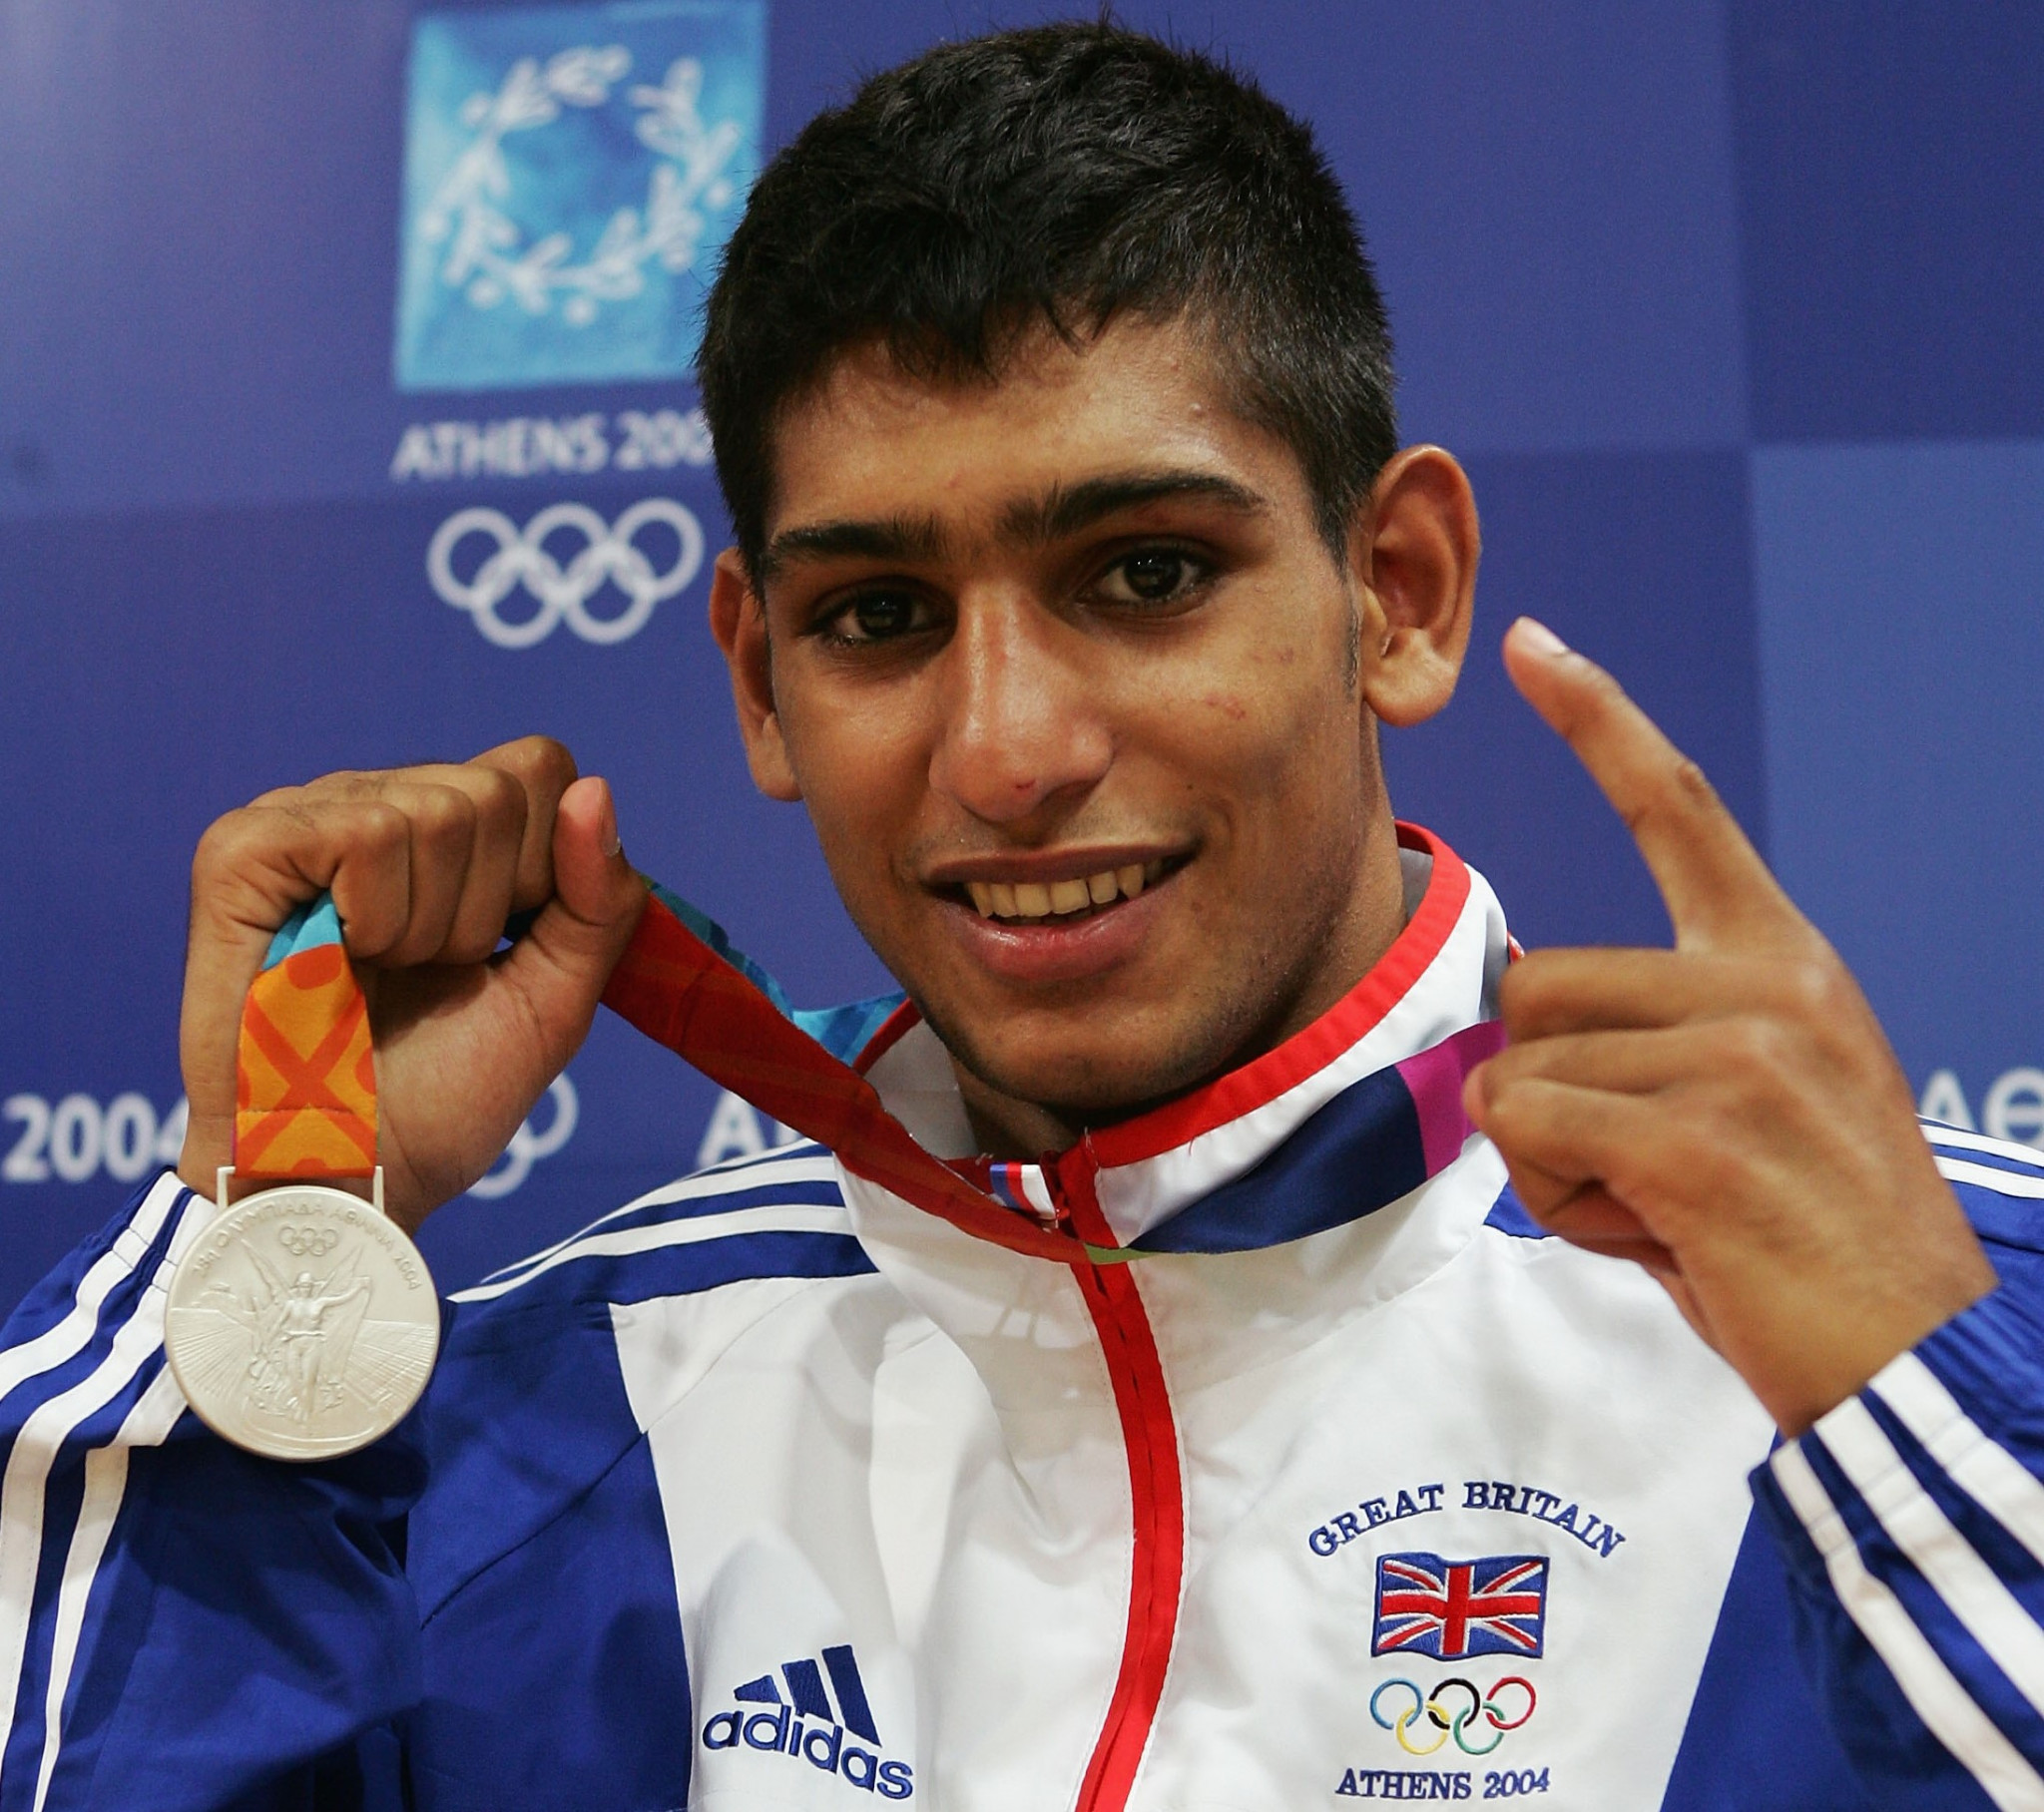 Amir Khan was just 17 when he won a silver medal at the Athens 2004 Olympics ©Getty Images